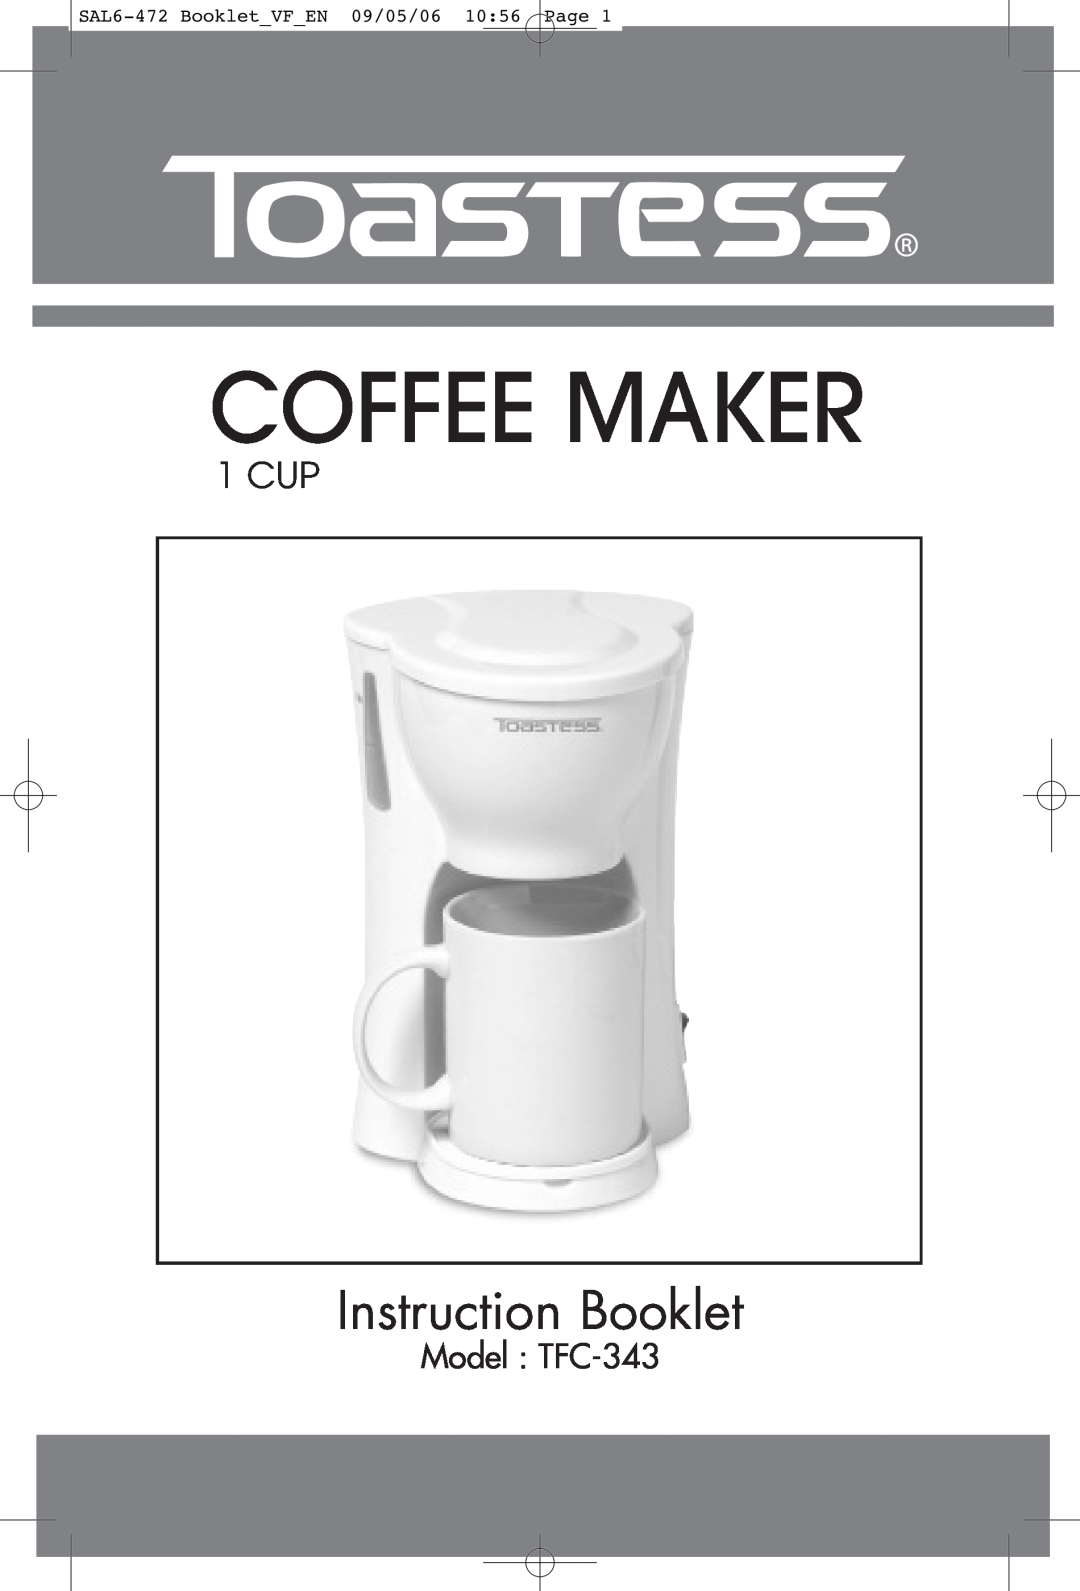 Toastess manual Model TFC-343, Coffee Maker, Instruction Booklet, 1 CUP, SAL6-472 BookletVFEN 09/05/06 1056 Page 